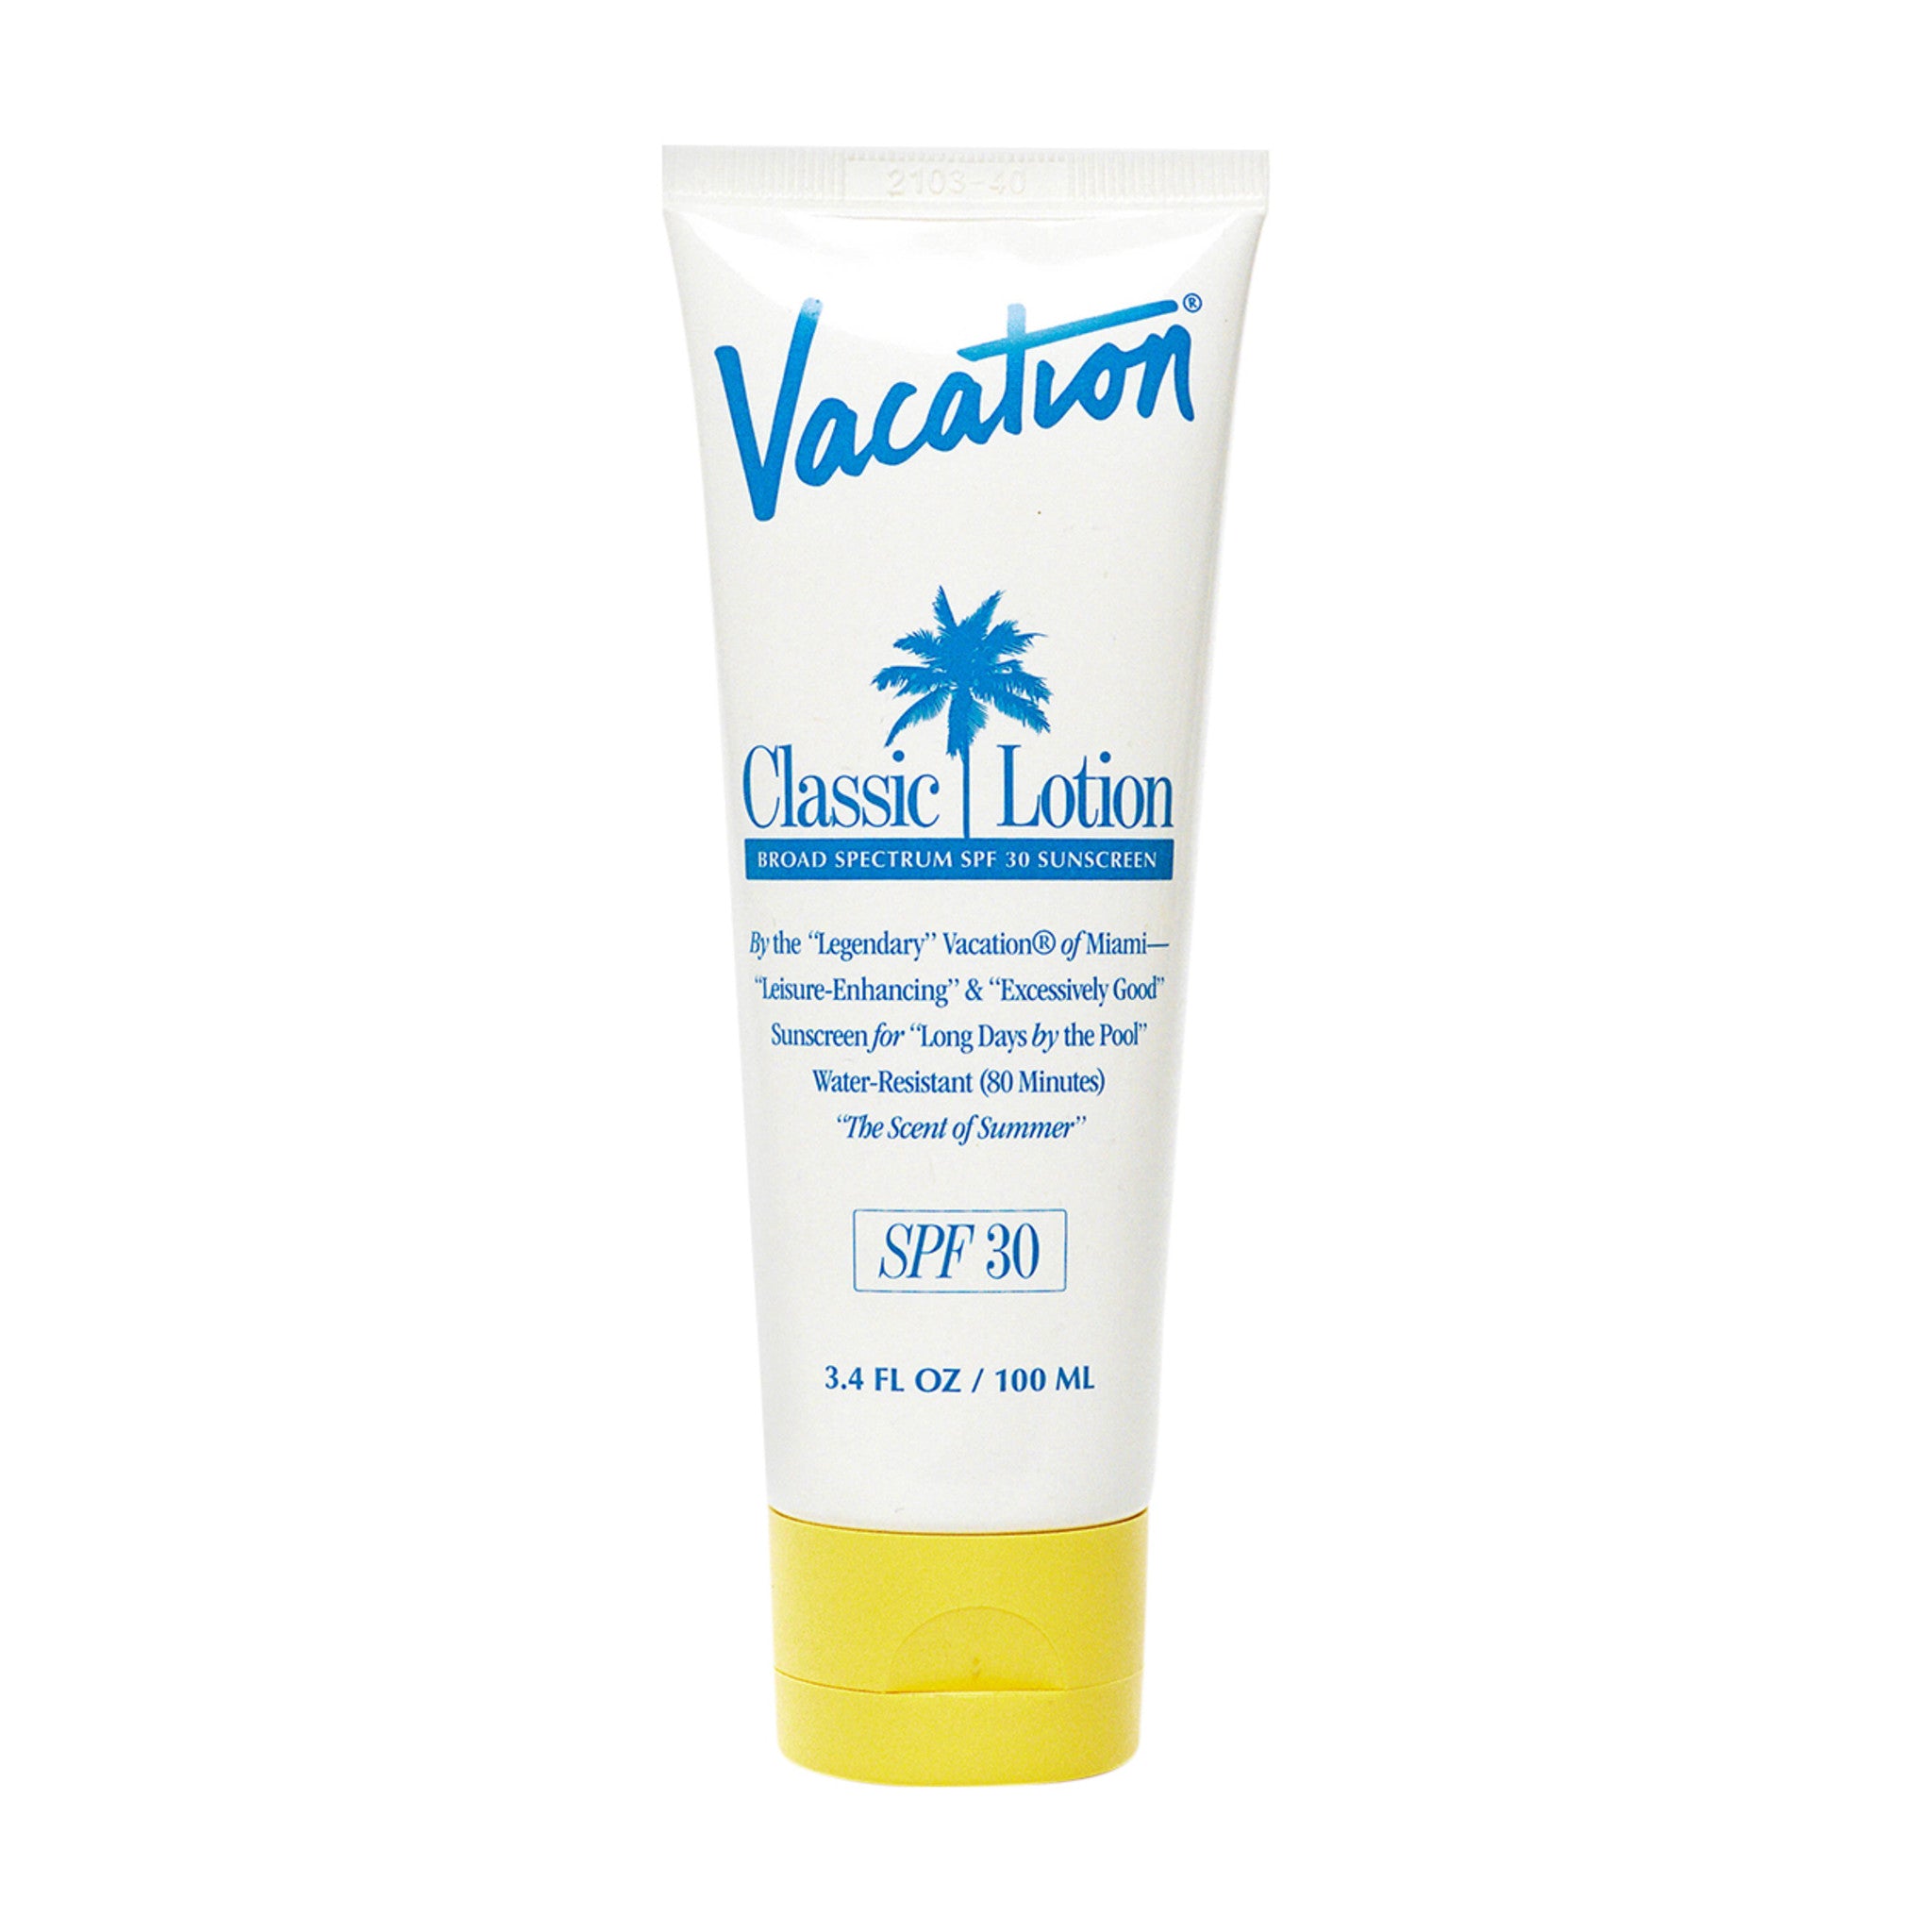 Vacation Classic Lotion SPF 30 main image.